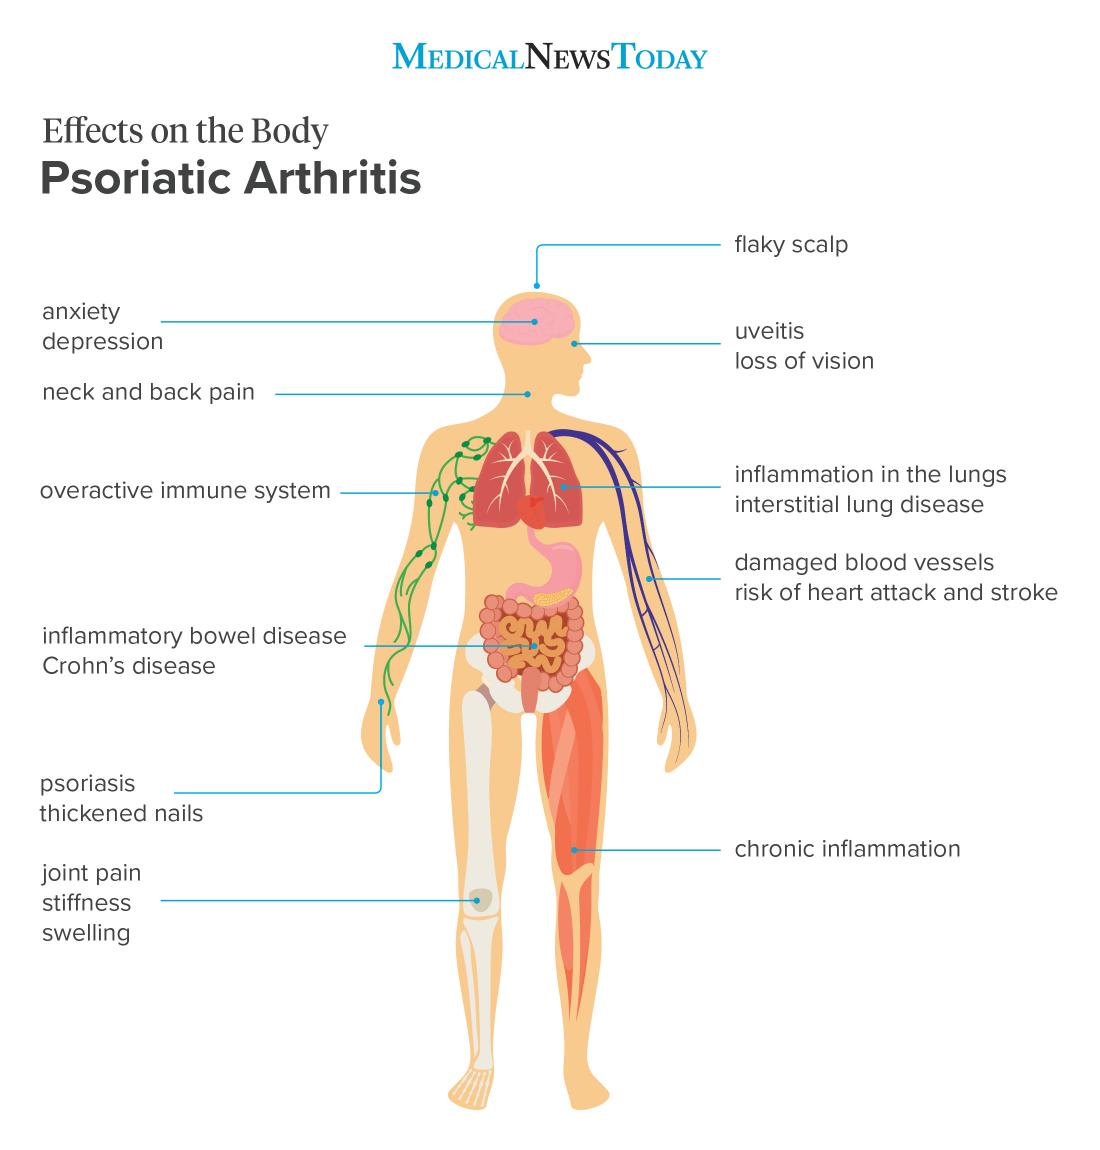 psoriatic arthritis effects on the body